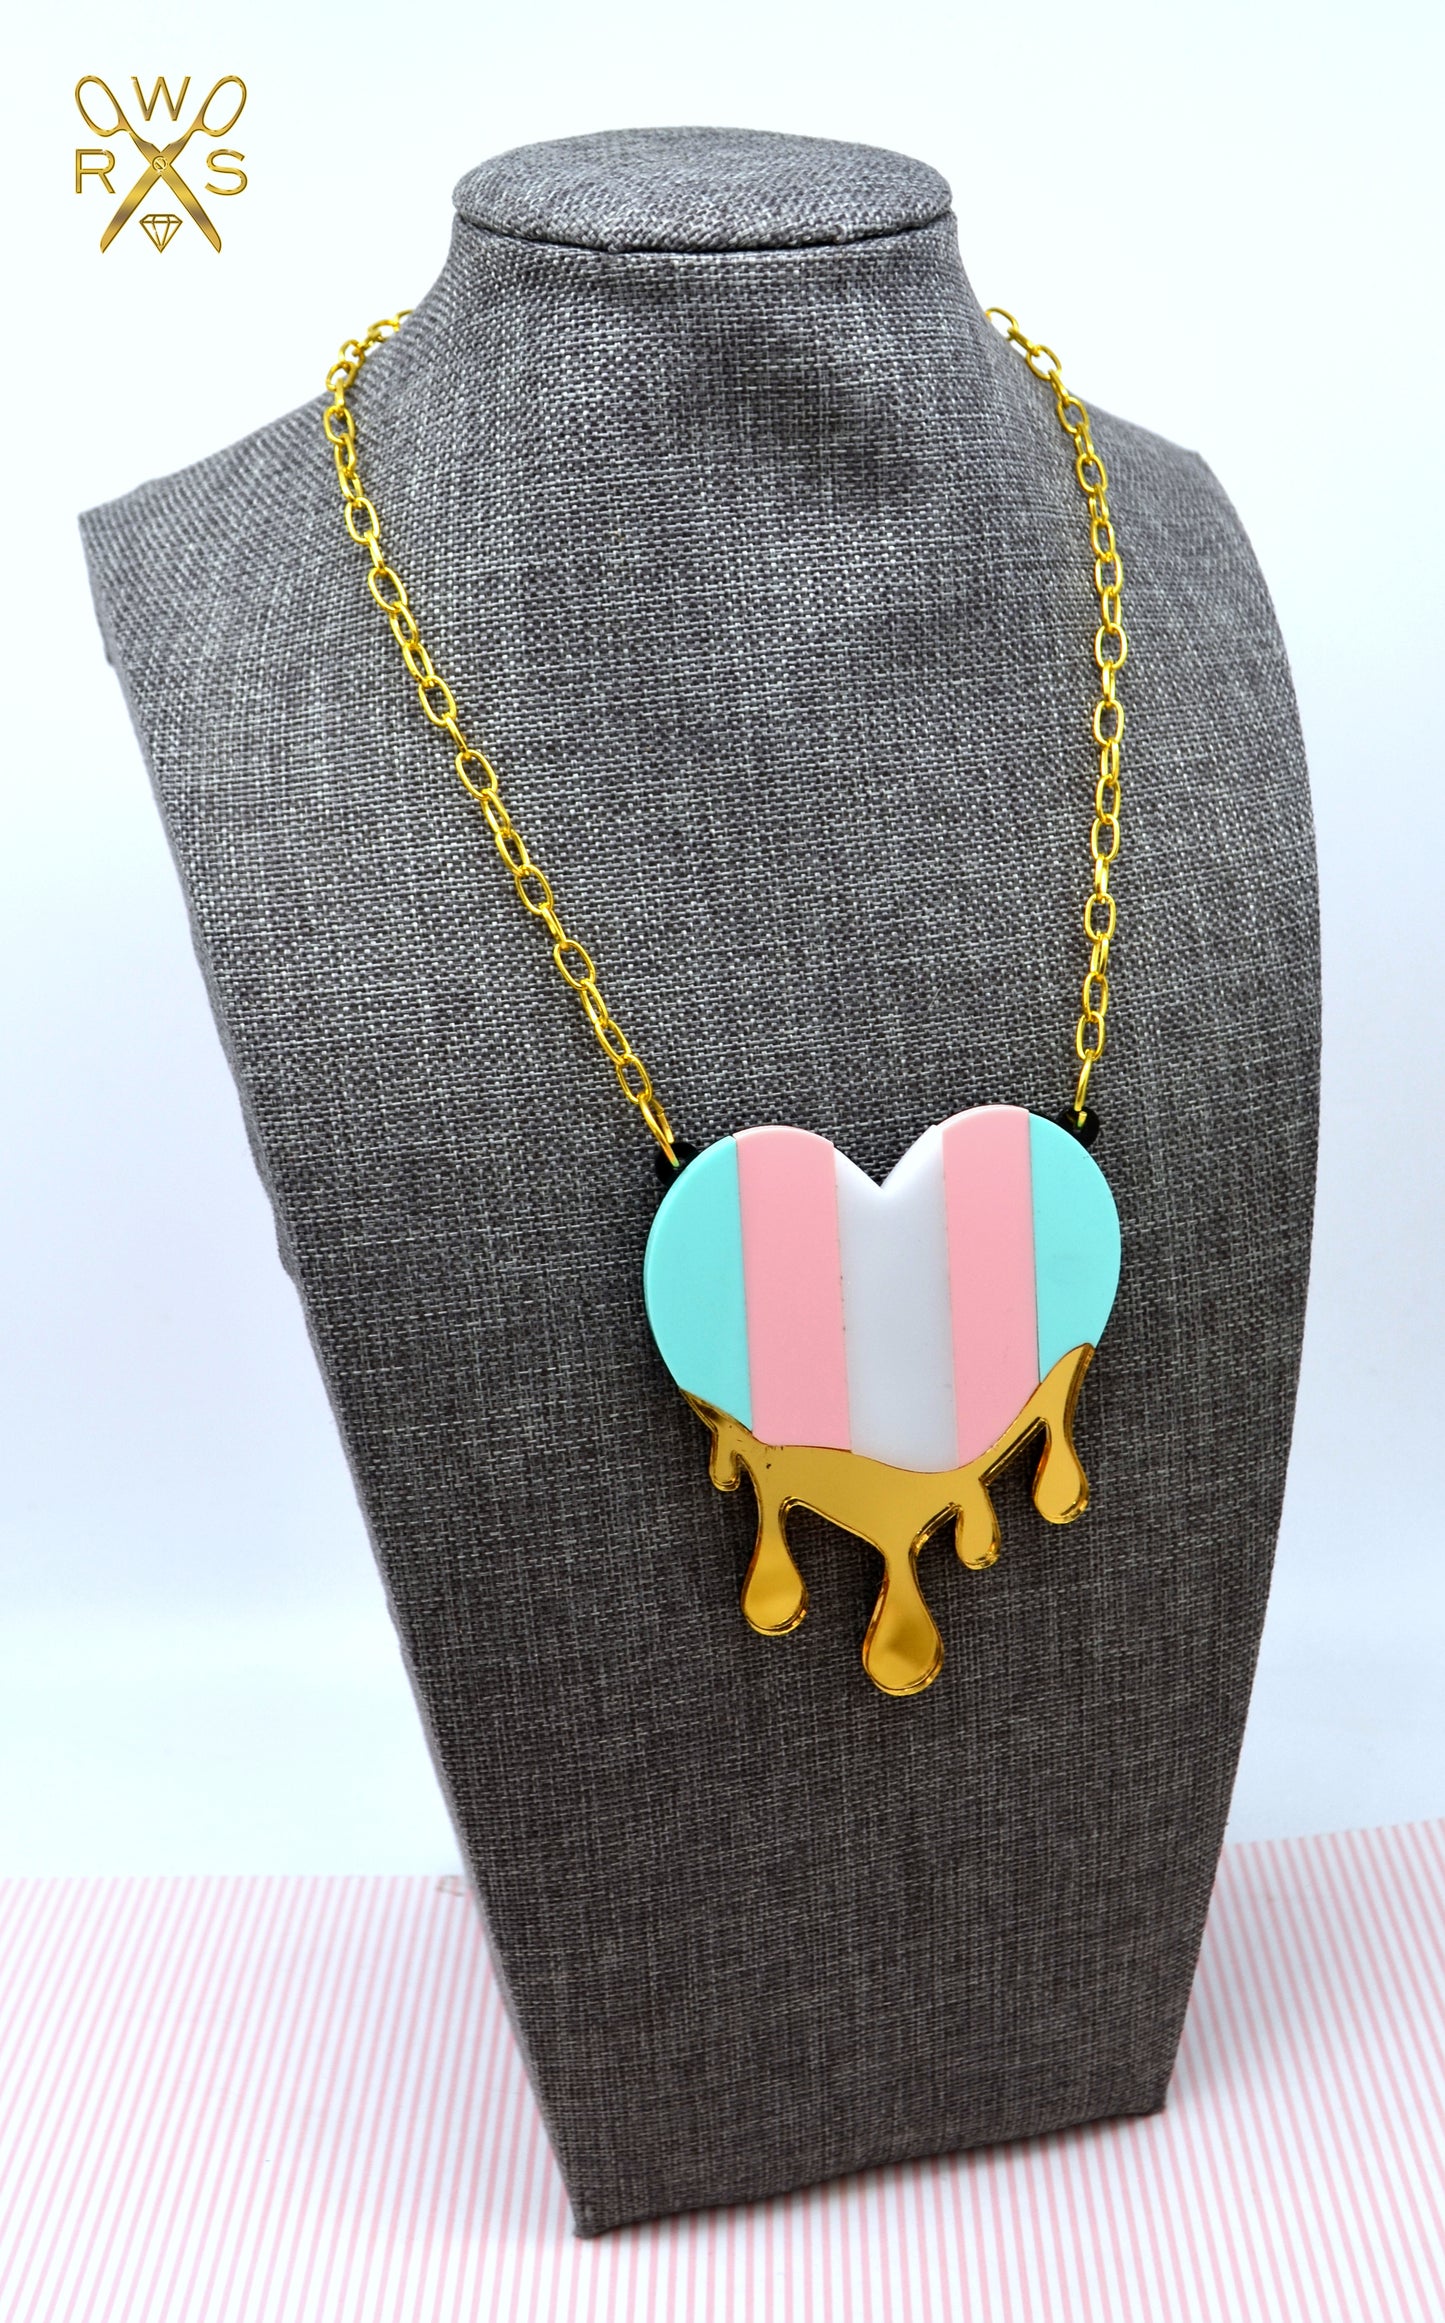 Dripping in Pride Trans Heart Pendant - Laser Cut Acrylic Necklace